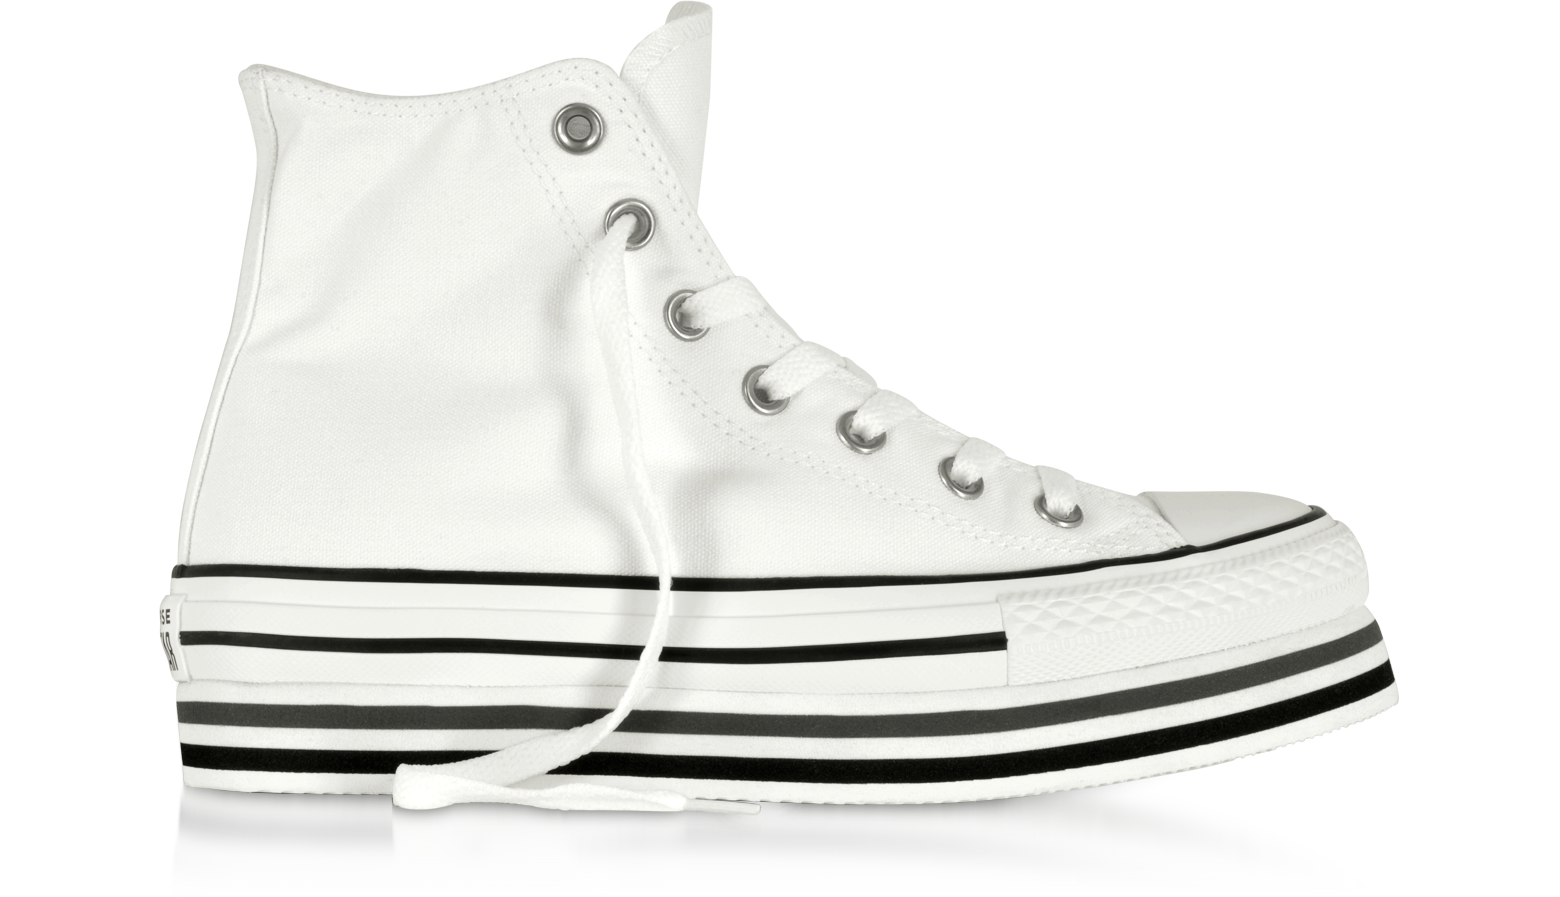 womens converse limited edition